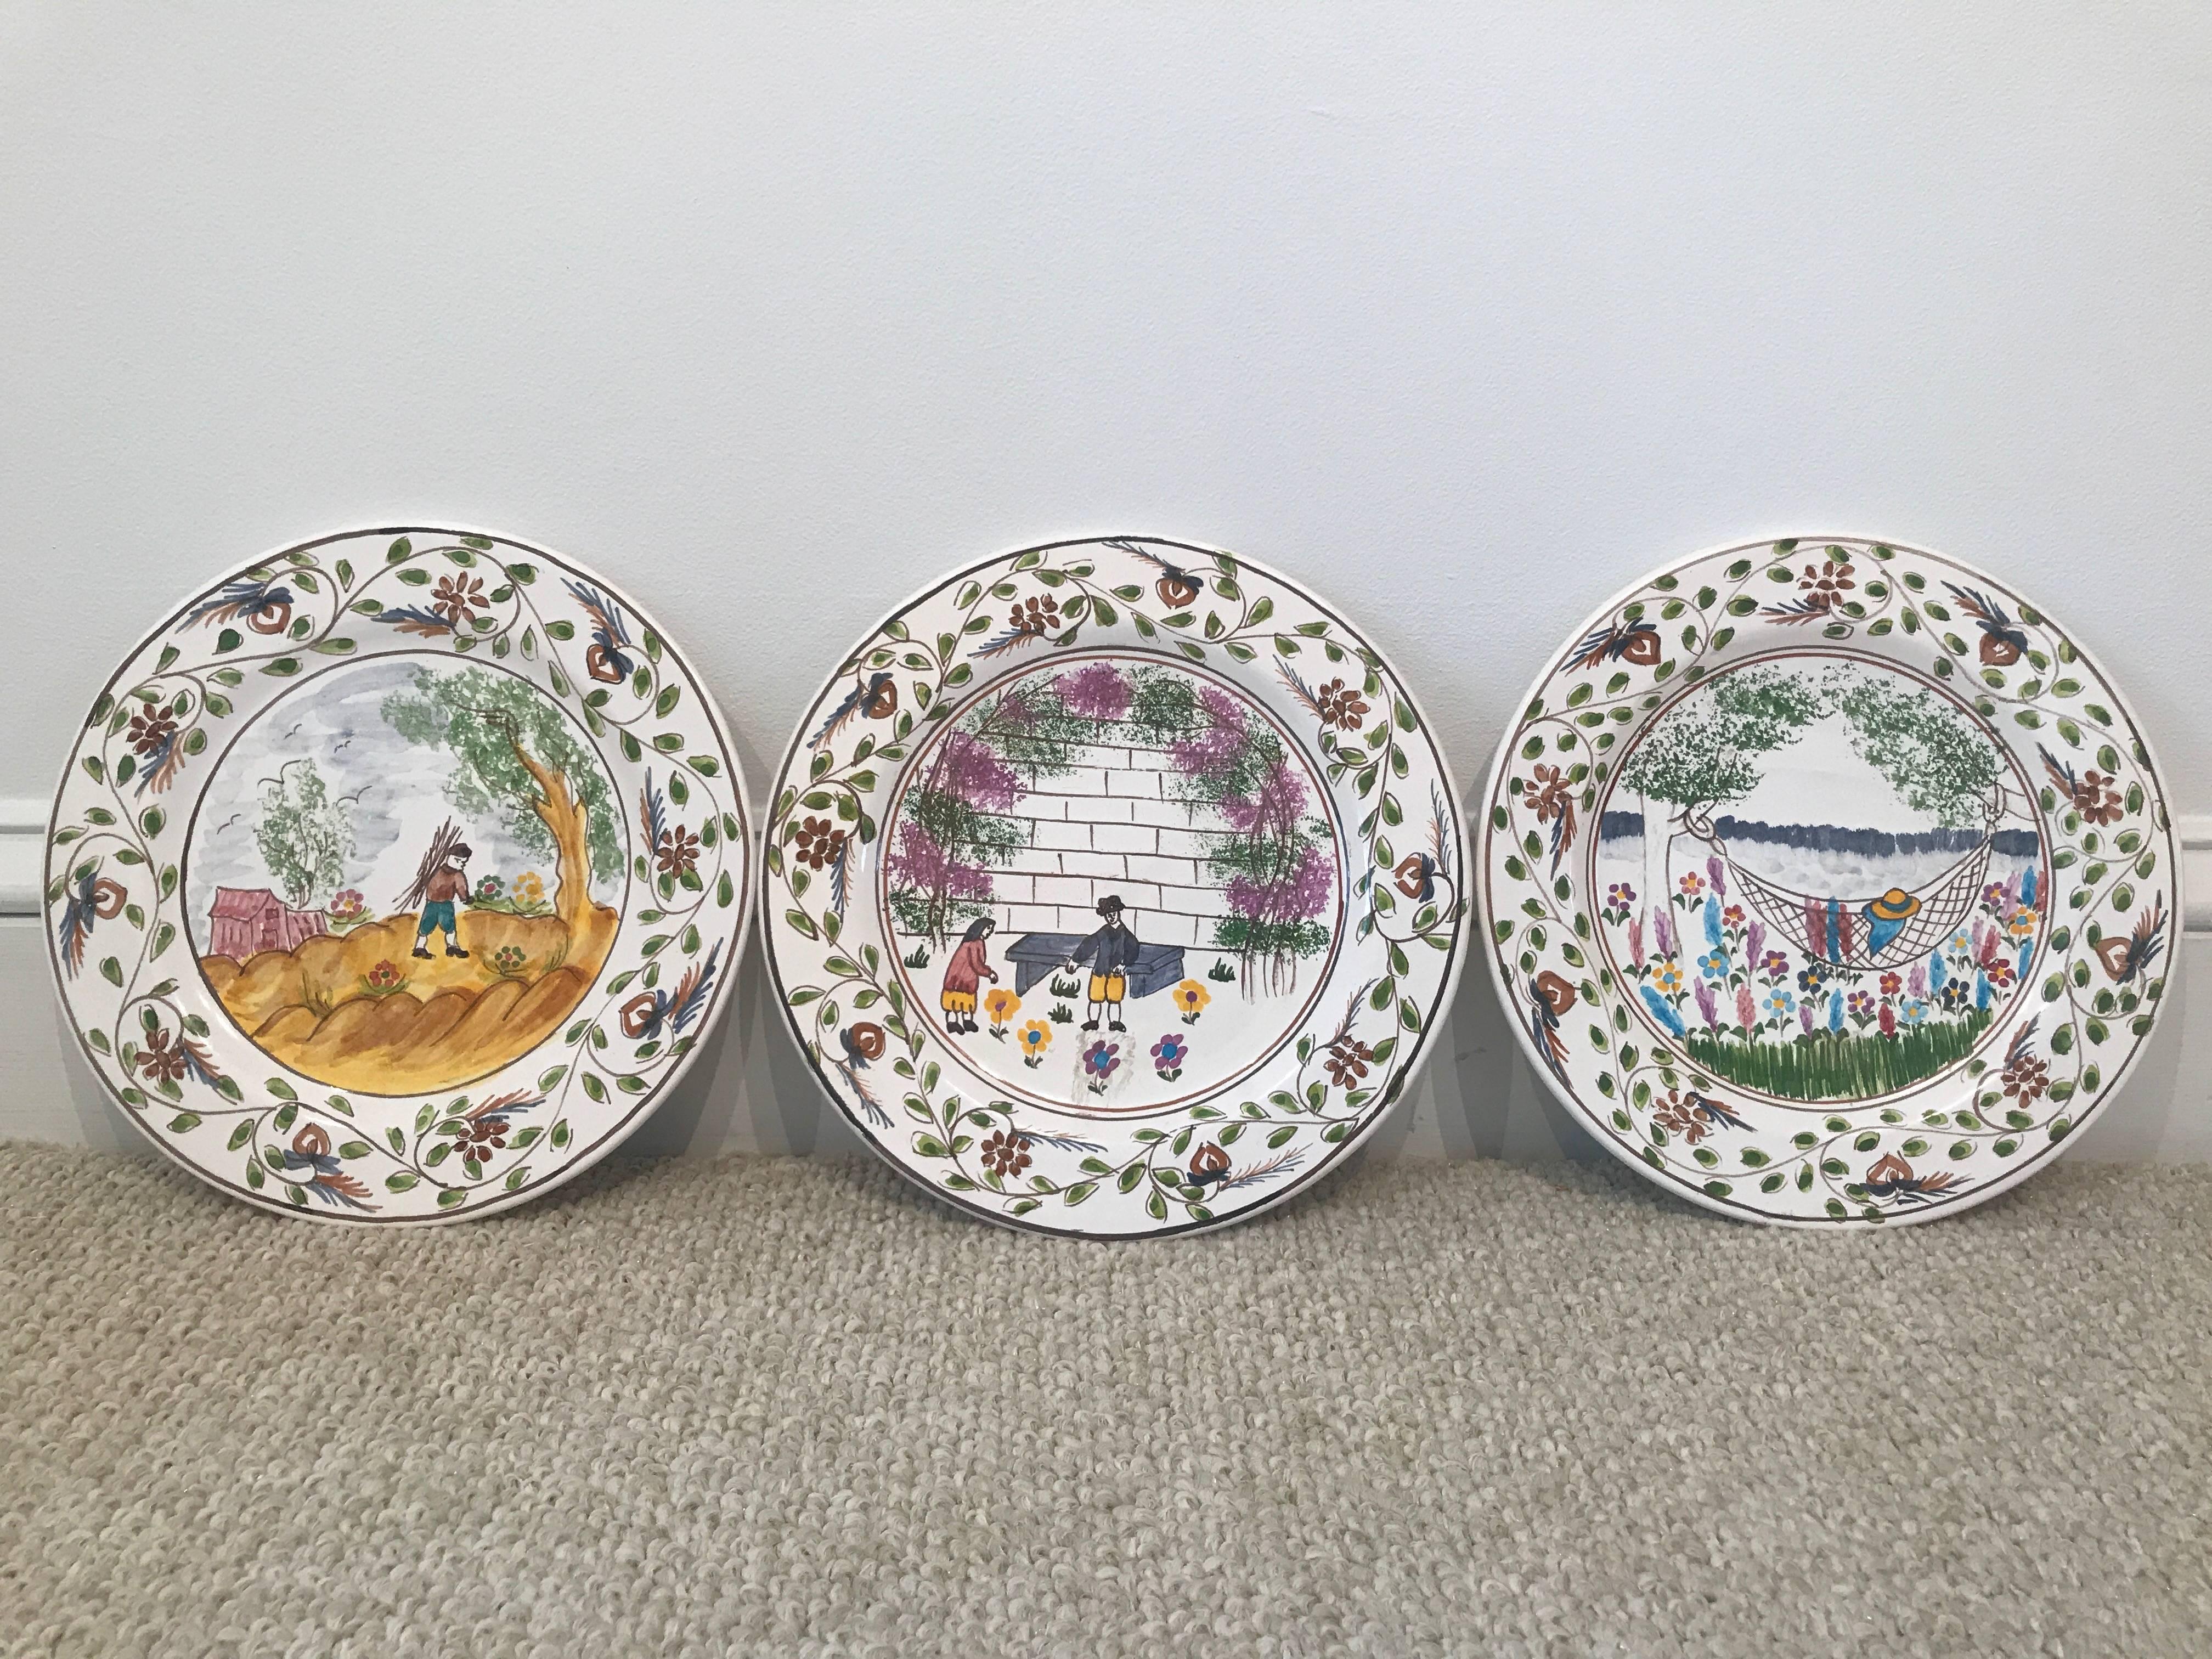 Charming scenes of rural family life have been hand-painted on this set of eight plates that were custom-made in Portugal. The colors are rich and the contrast is great; would make an ideal display on a wall or a tabletop.